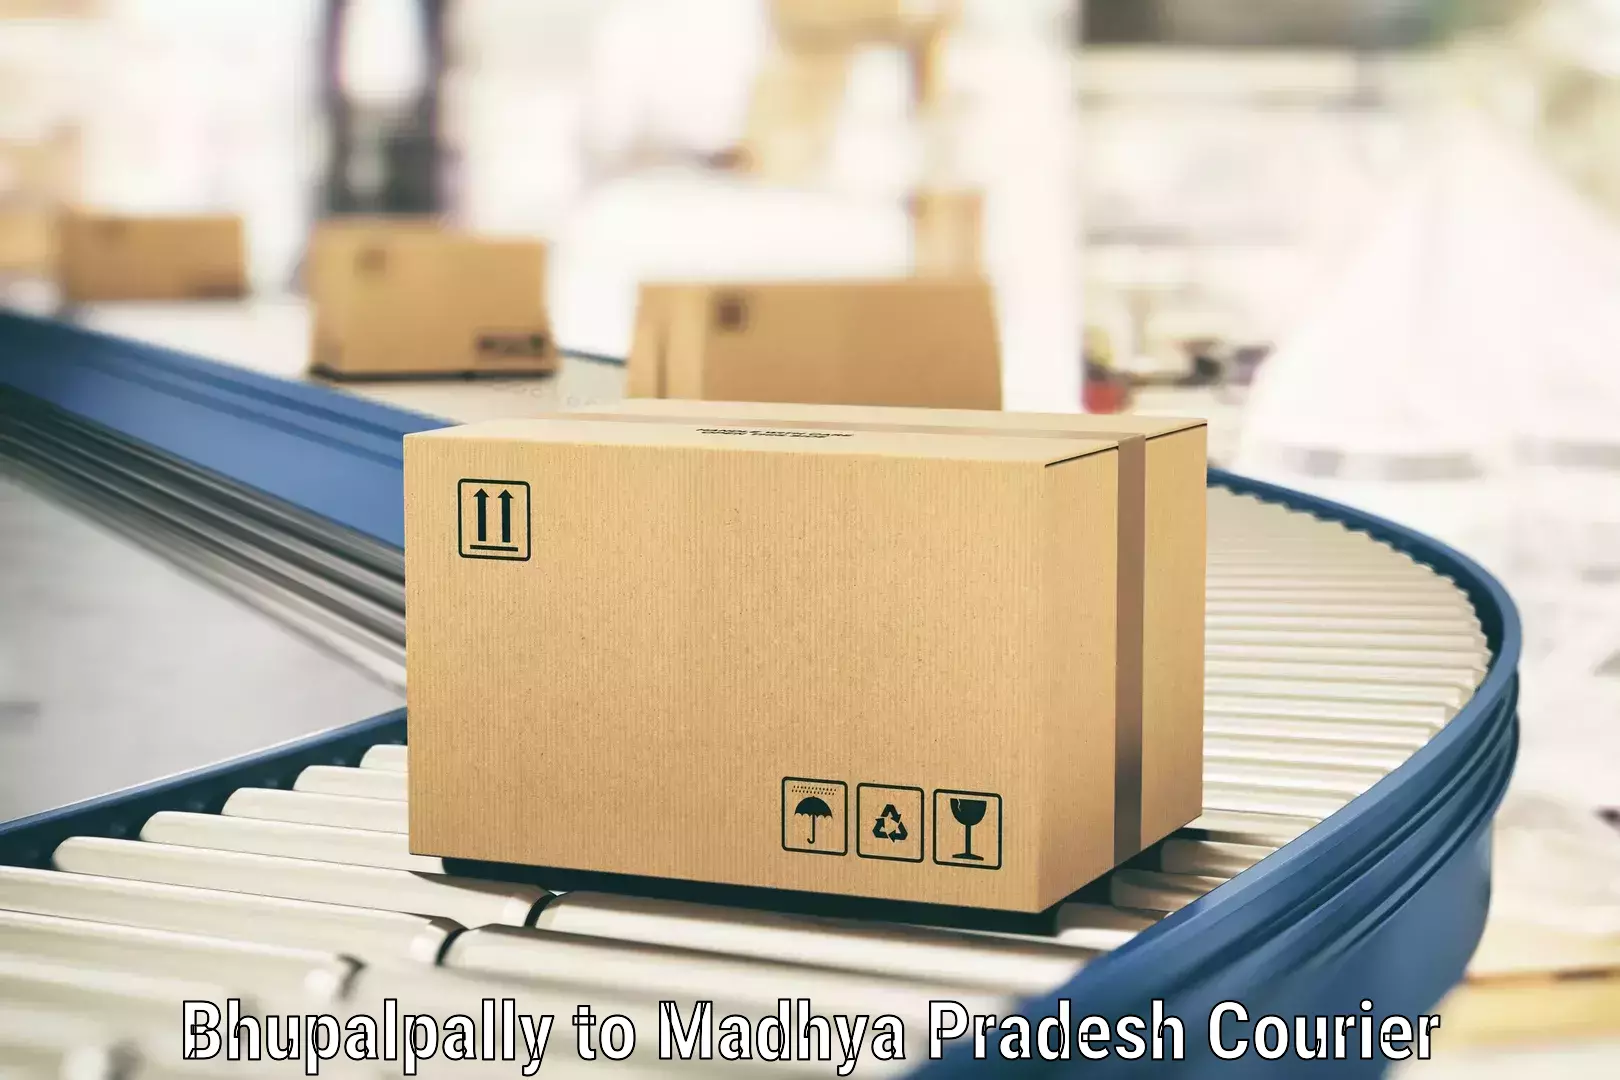 Nationwide parcel services Bhupalpally to Ashta